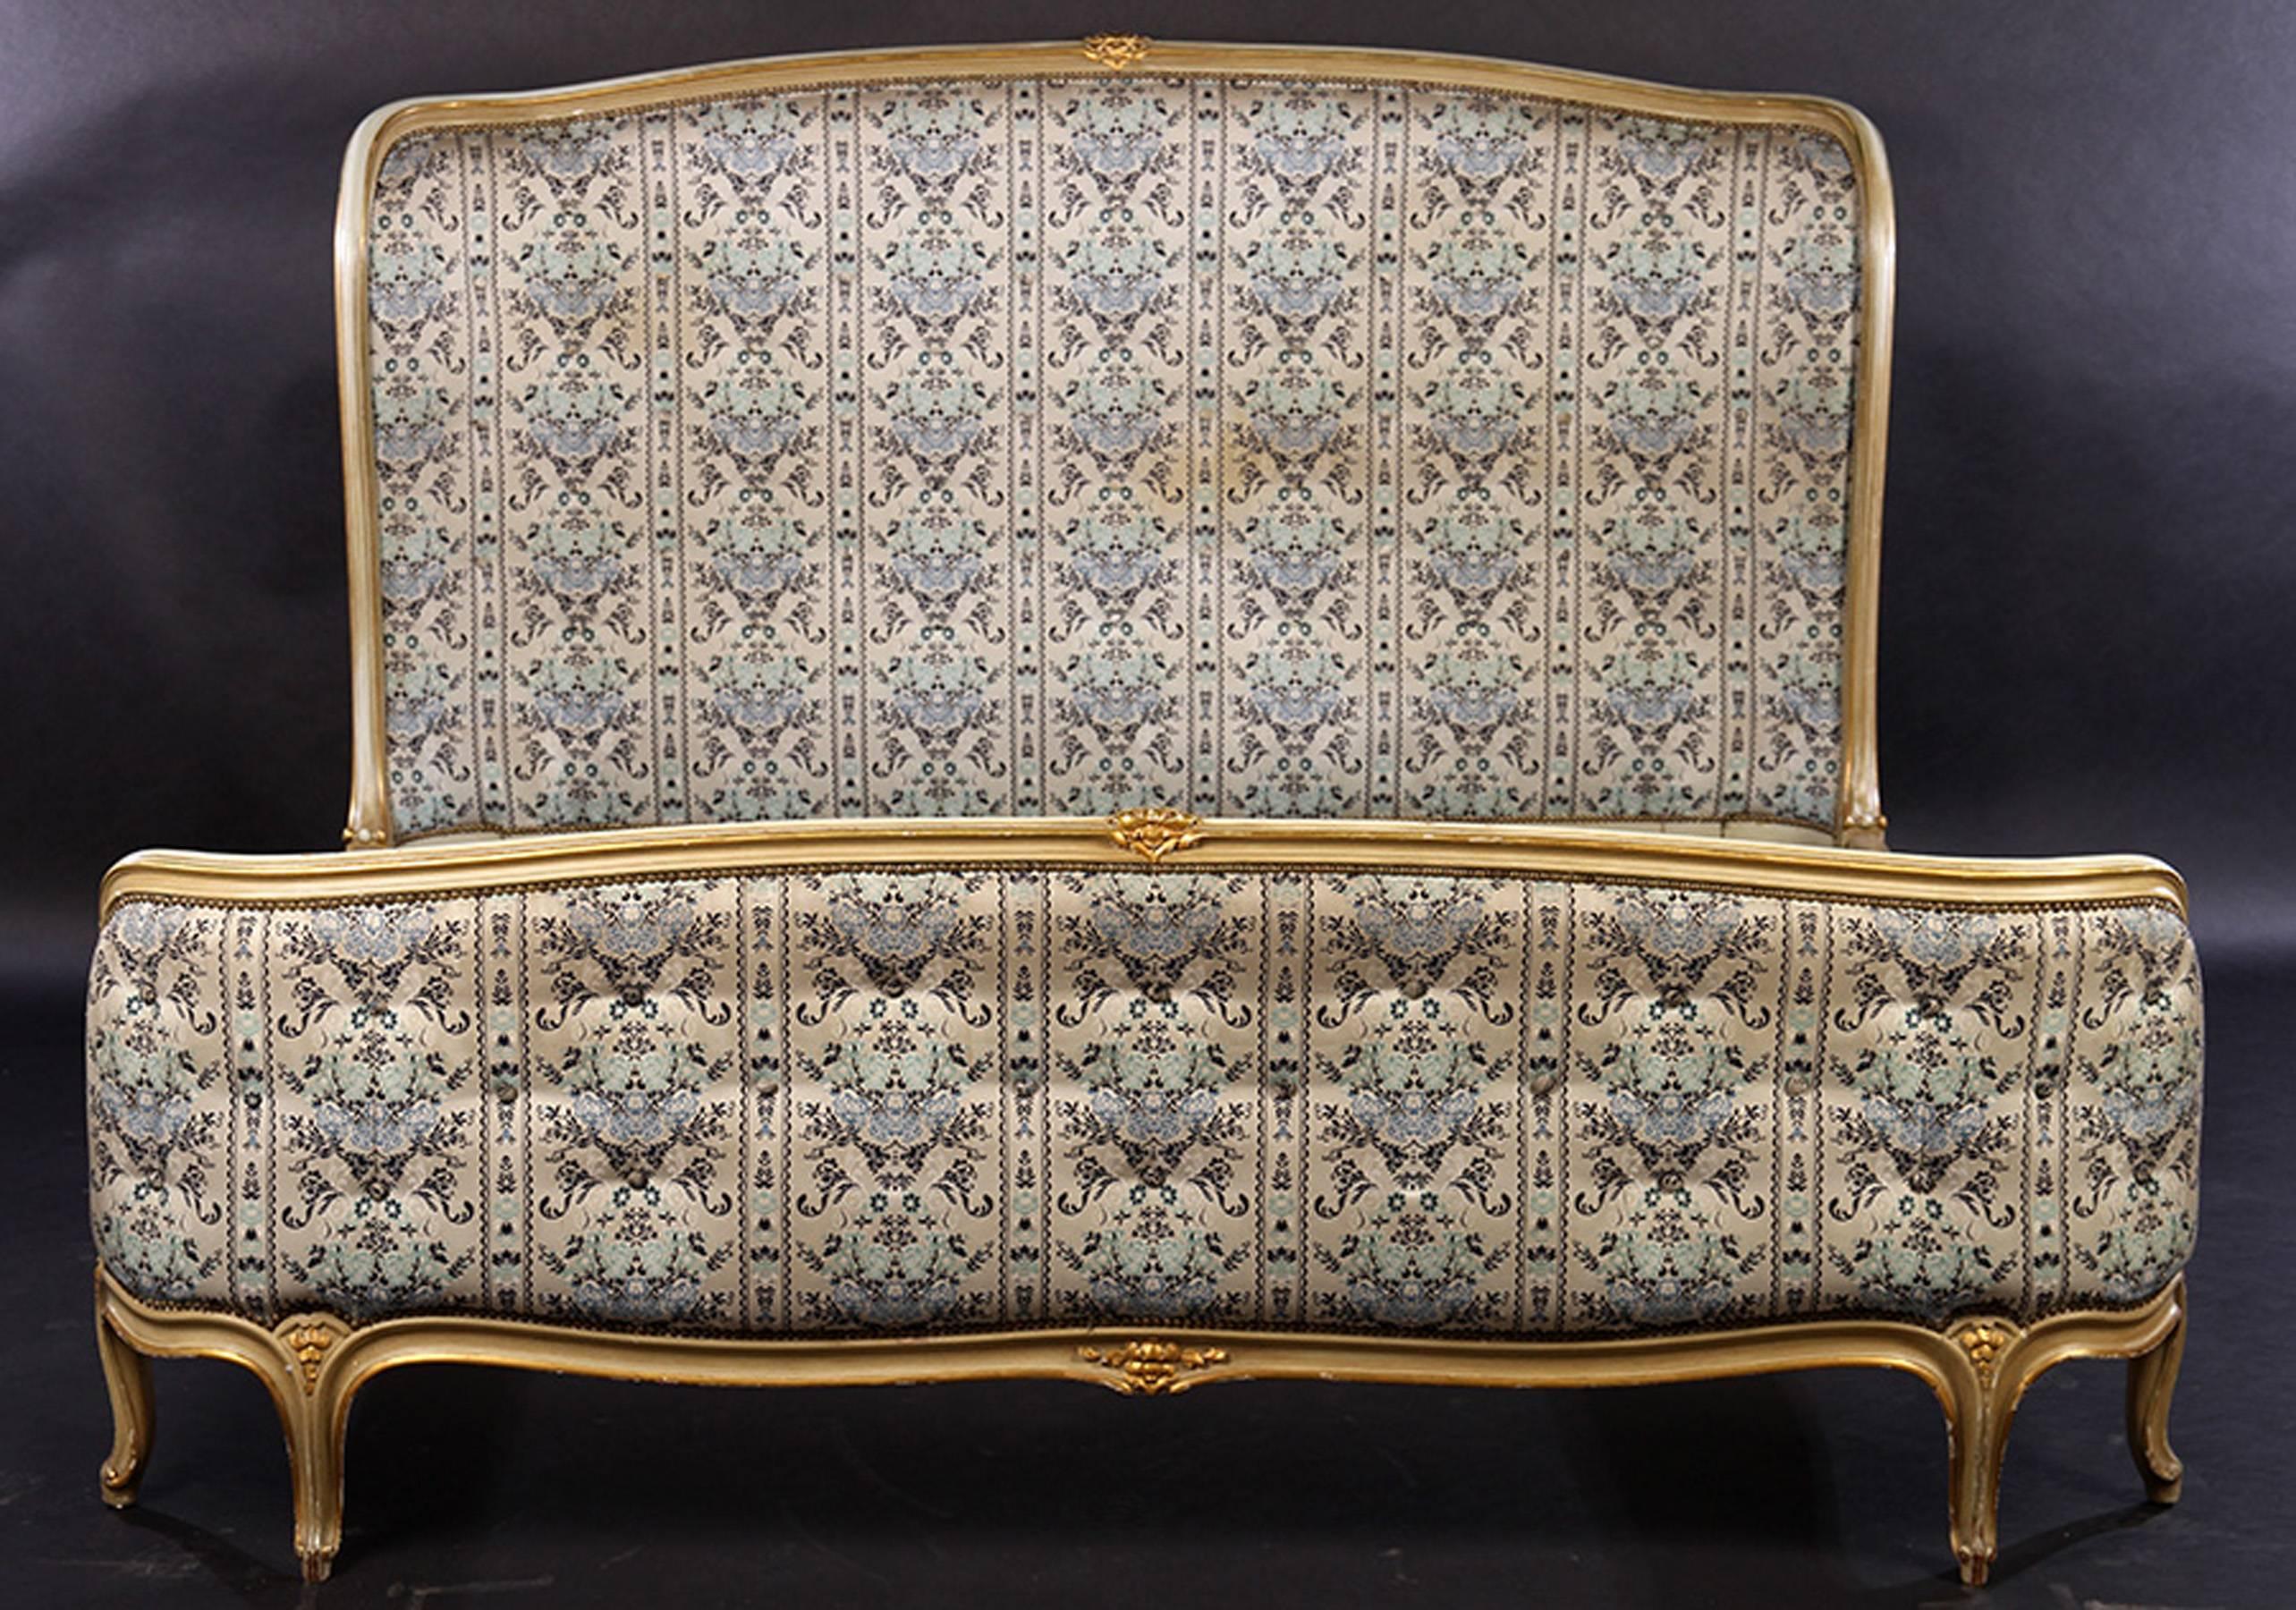 A 20th Century French Louis XV upholstered bed with original tufted upholstered head and foot boards. Very good painted carving with giltwood accents. Original Finish.

Mattress dimensions: 67.5'' W x 75.5'' L,  7'' Height from floor to box spring.